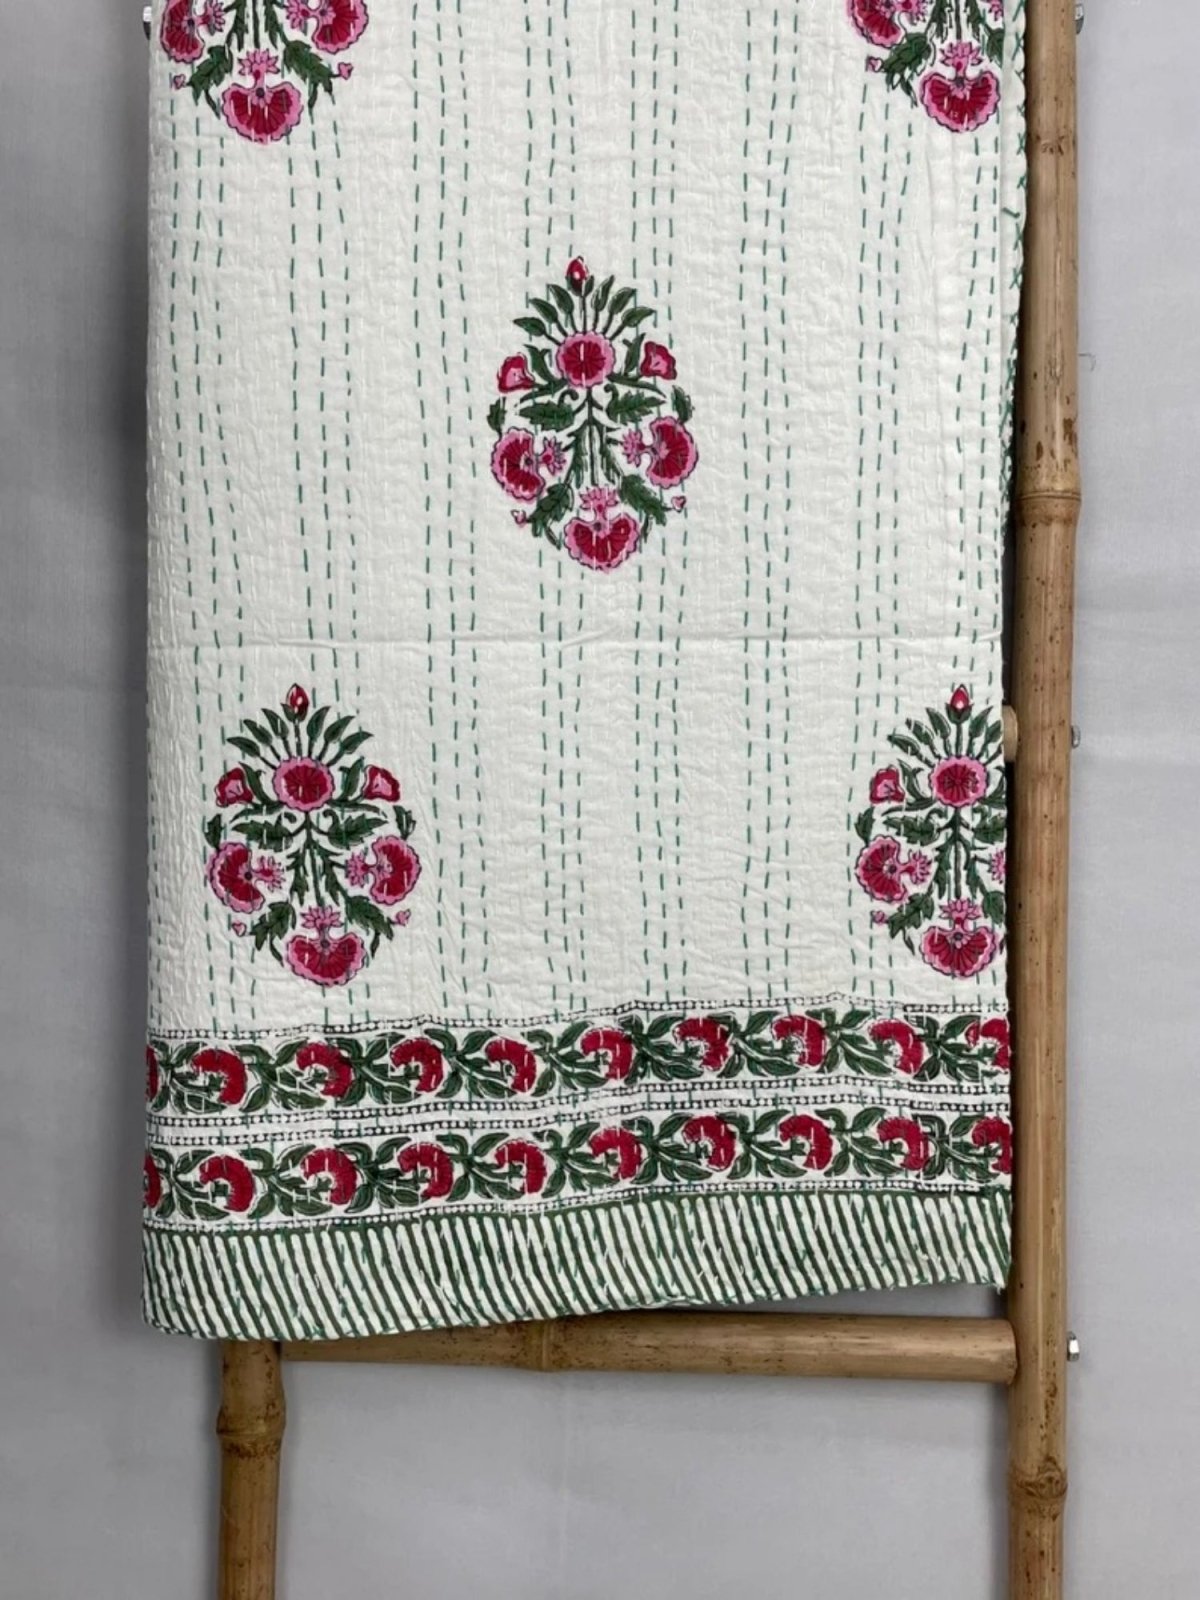 Pure Cotton Kantha Reversible Bed/Sofa Throw King Size | Hand Stitched Block print Floral Dohar | Pink Persian Paisley Leaf Motifs Stripes - The Eastern Loom